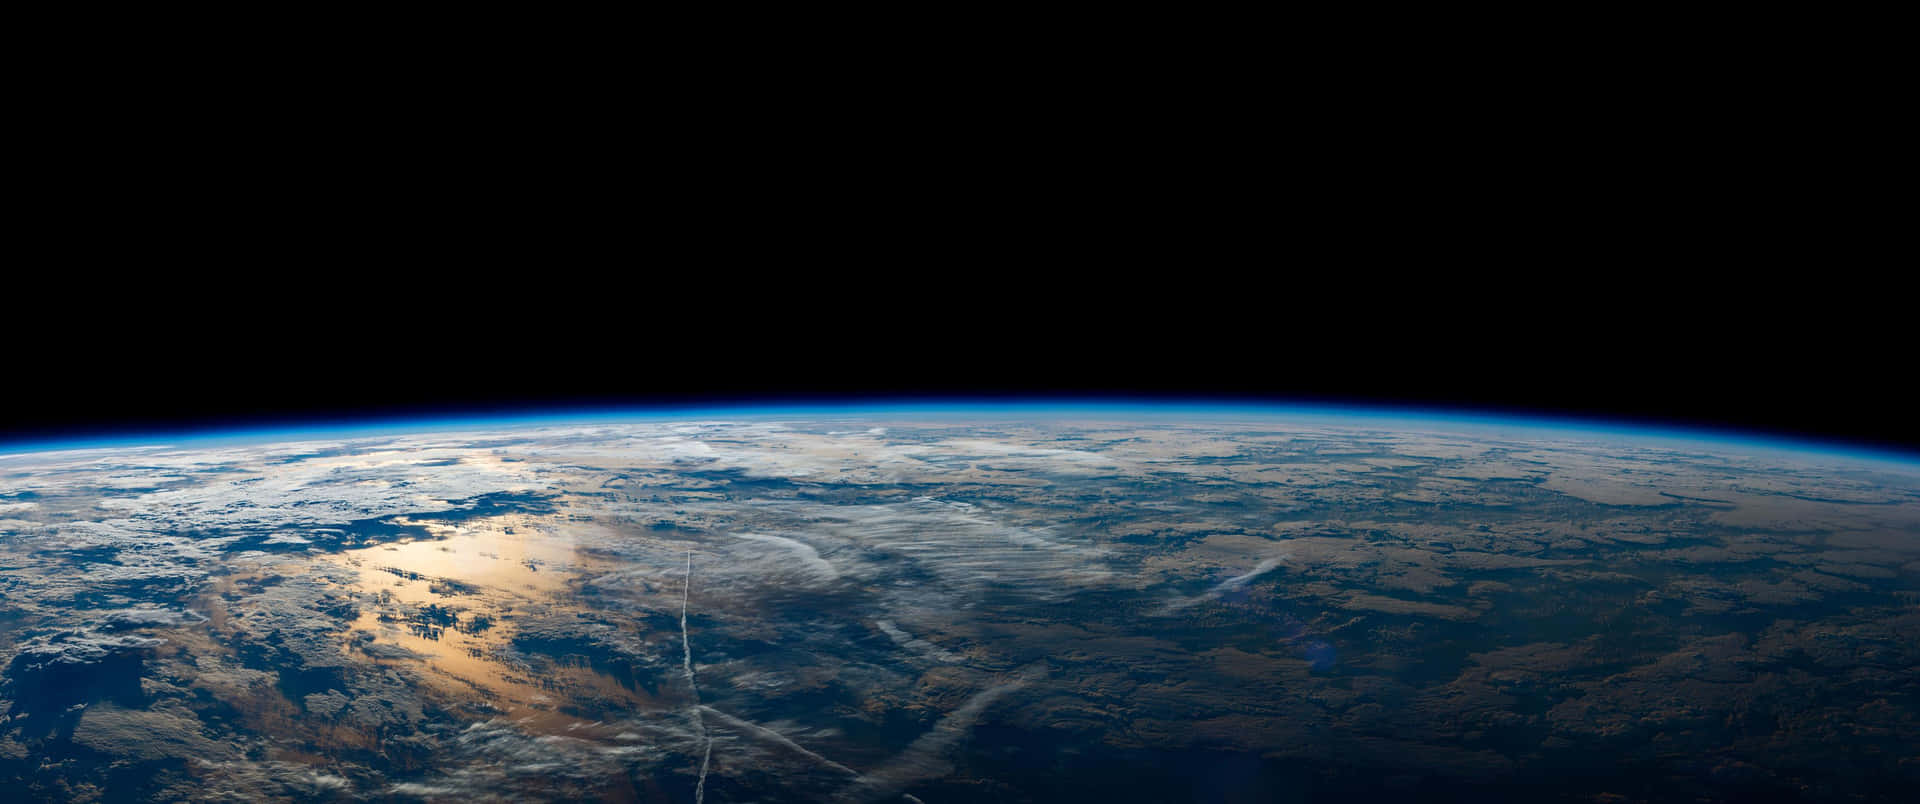 Beautiful 3440x1440 Space Earth Surface Wallpaper